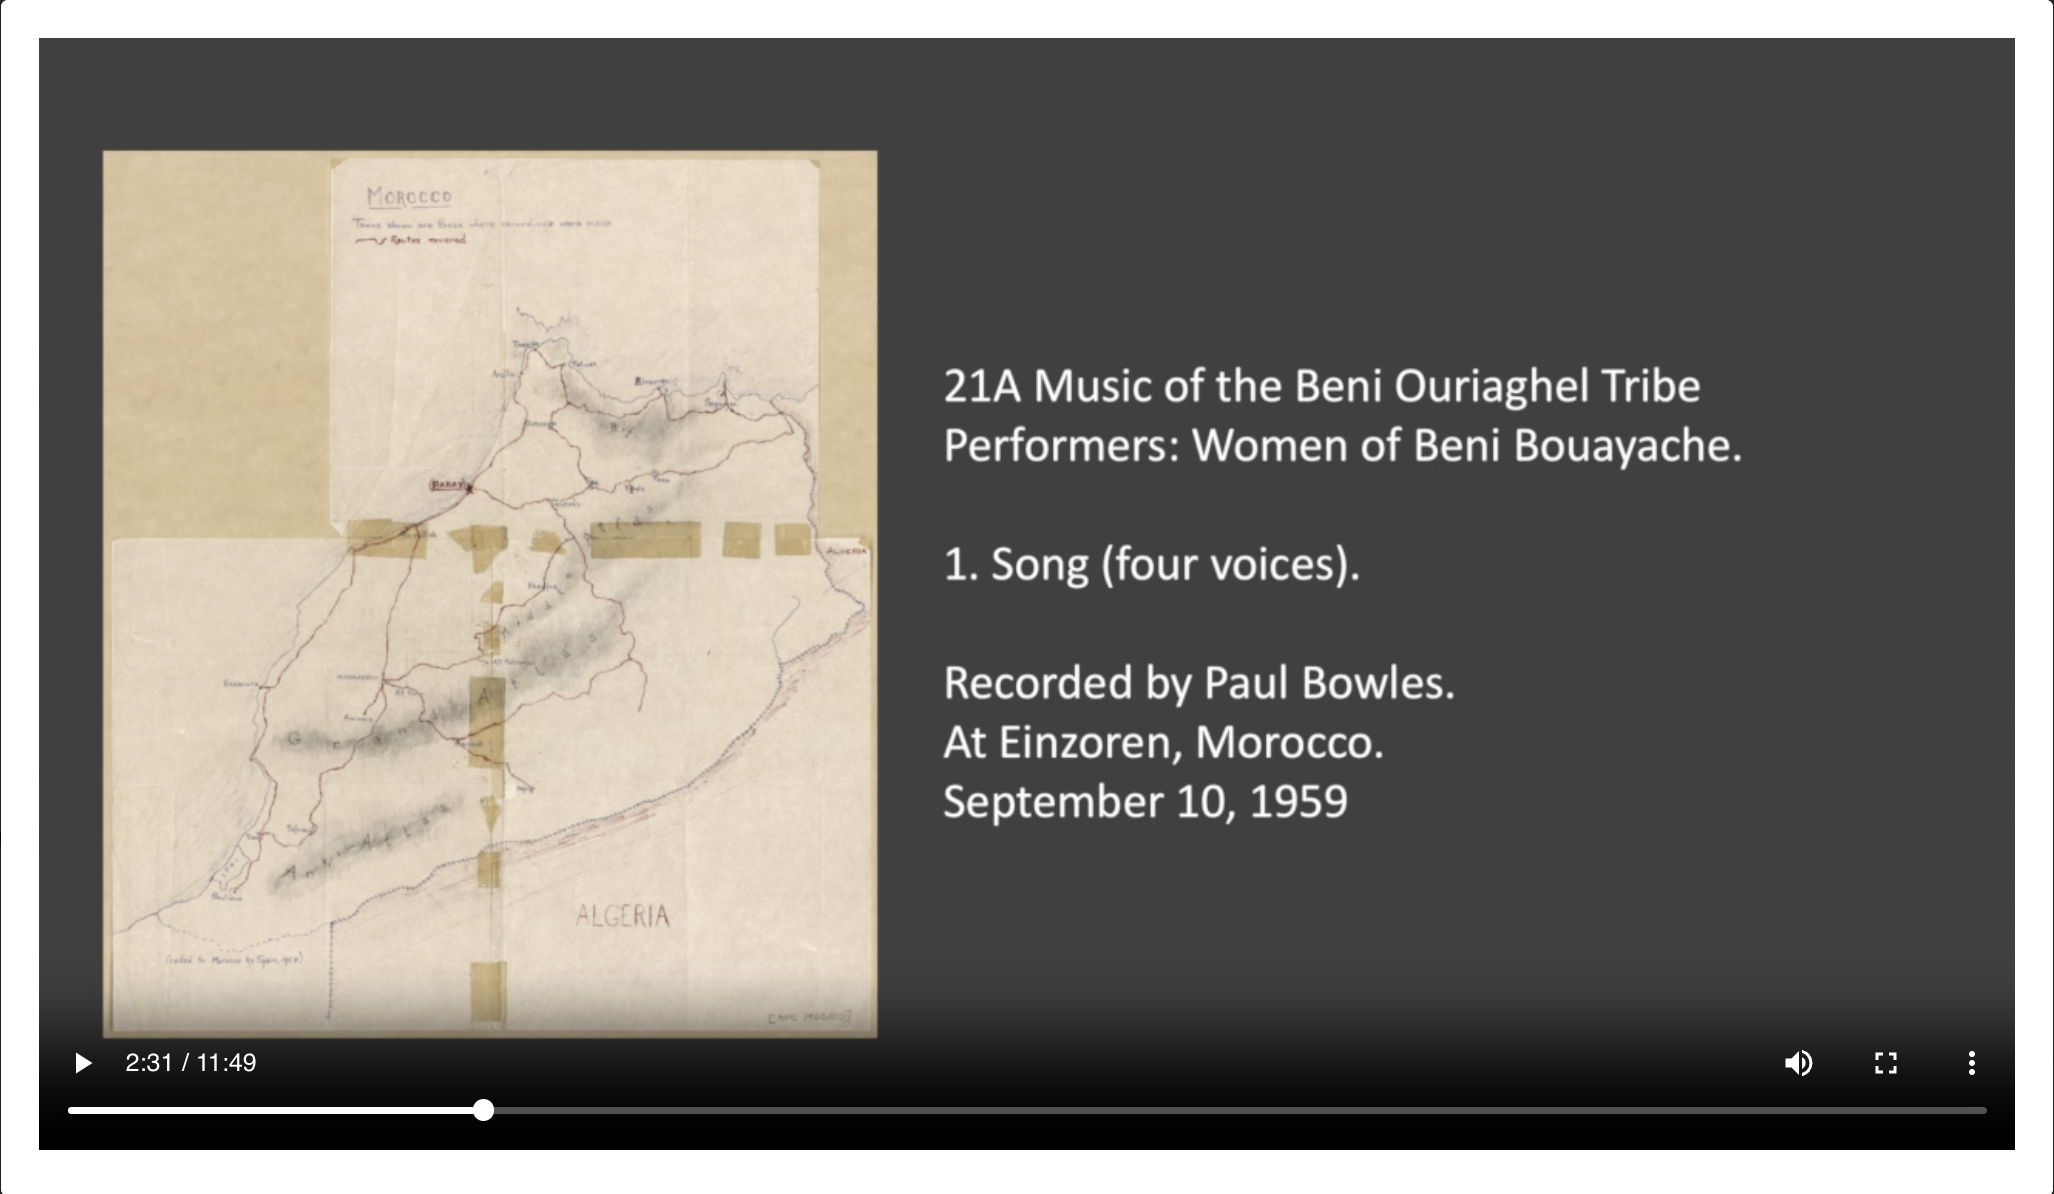 <p>21A-1 Song Music of the Beni Ouriaghel Tribe Performers: Women of Beni Bouayache. Recorded by Paul Bowles. At Einzoren, Morocco. September 10, 1959</p>